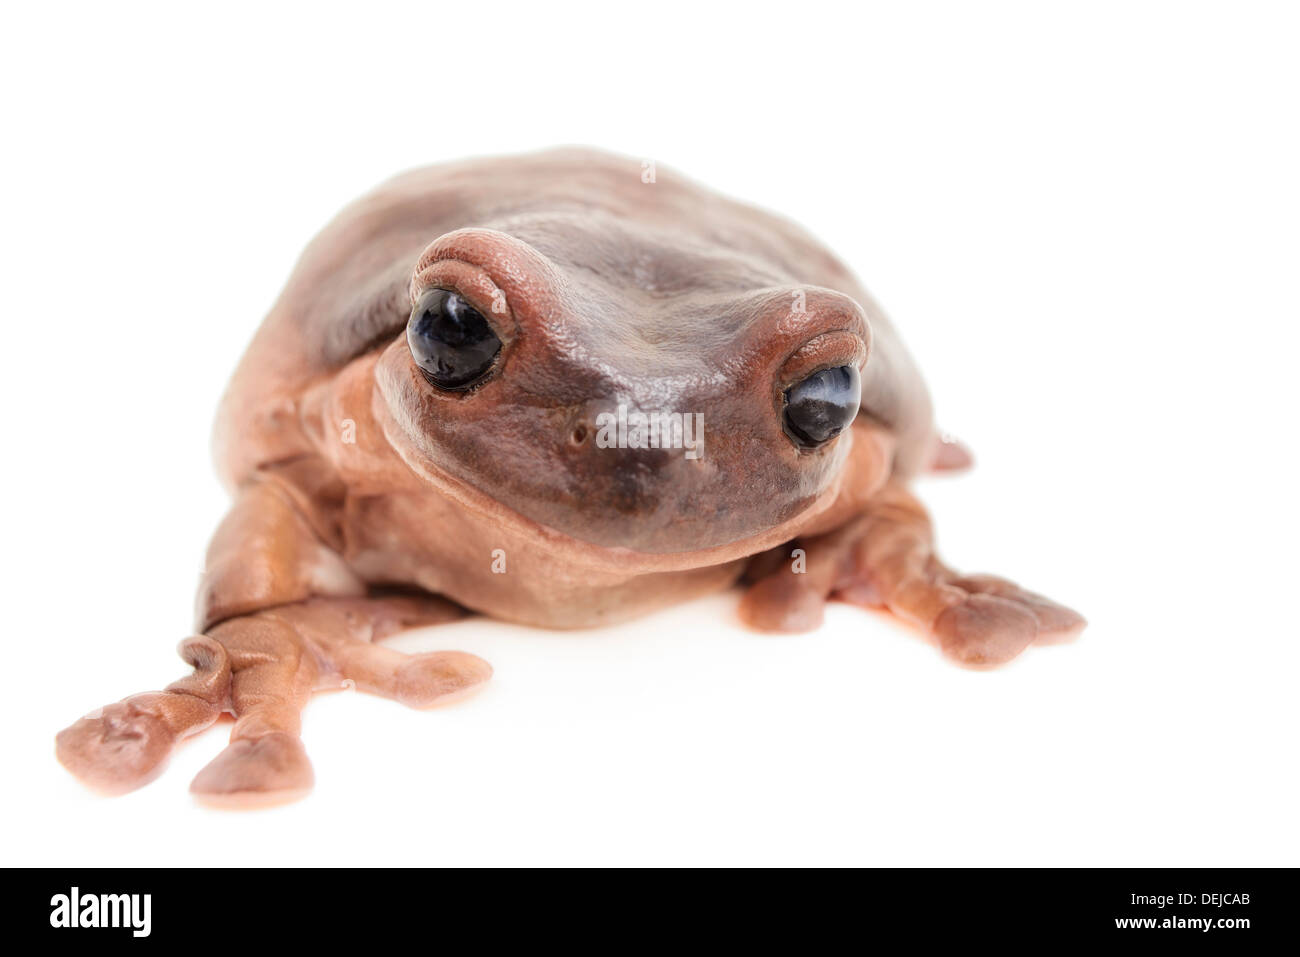 Closeup of a white's tree frog isolated in front of a white background. Stock Photo